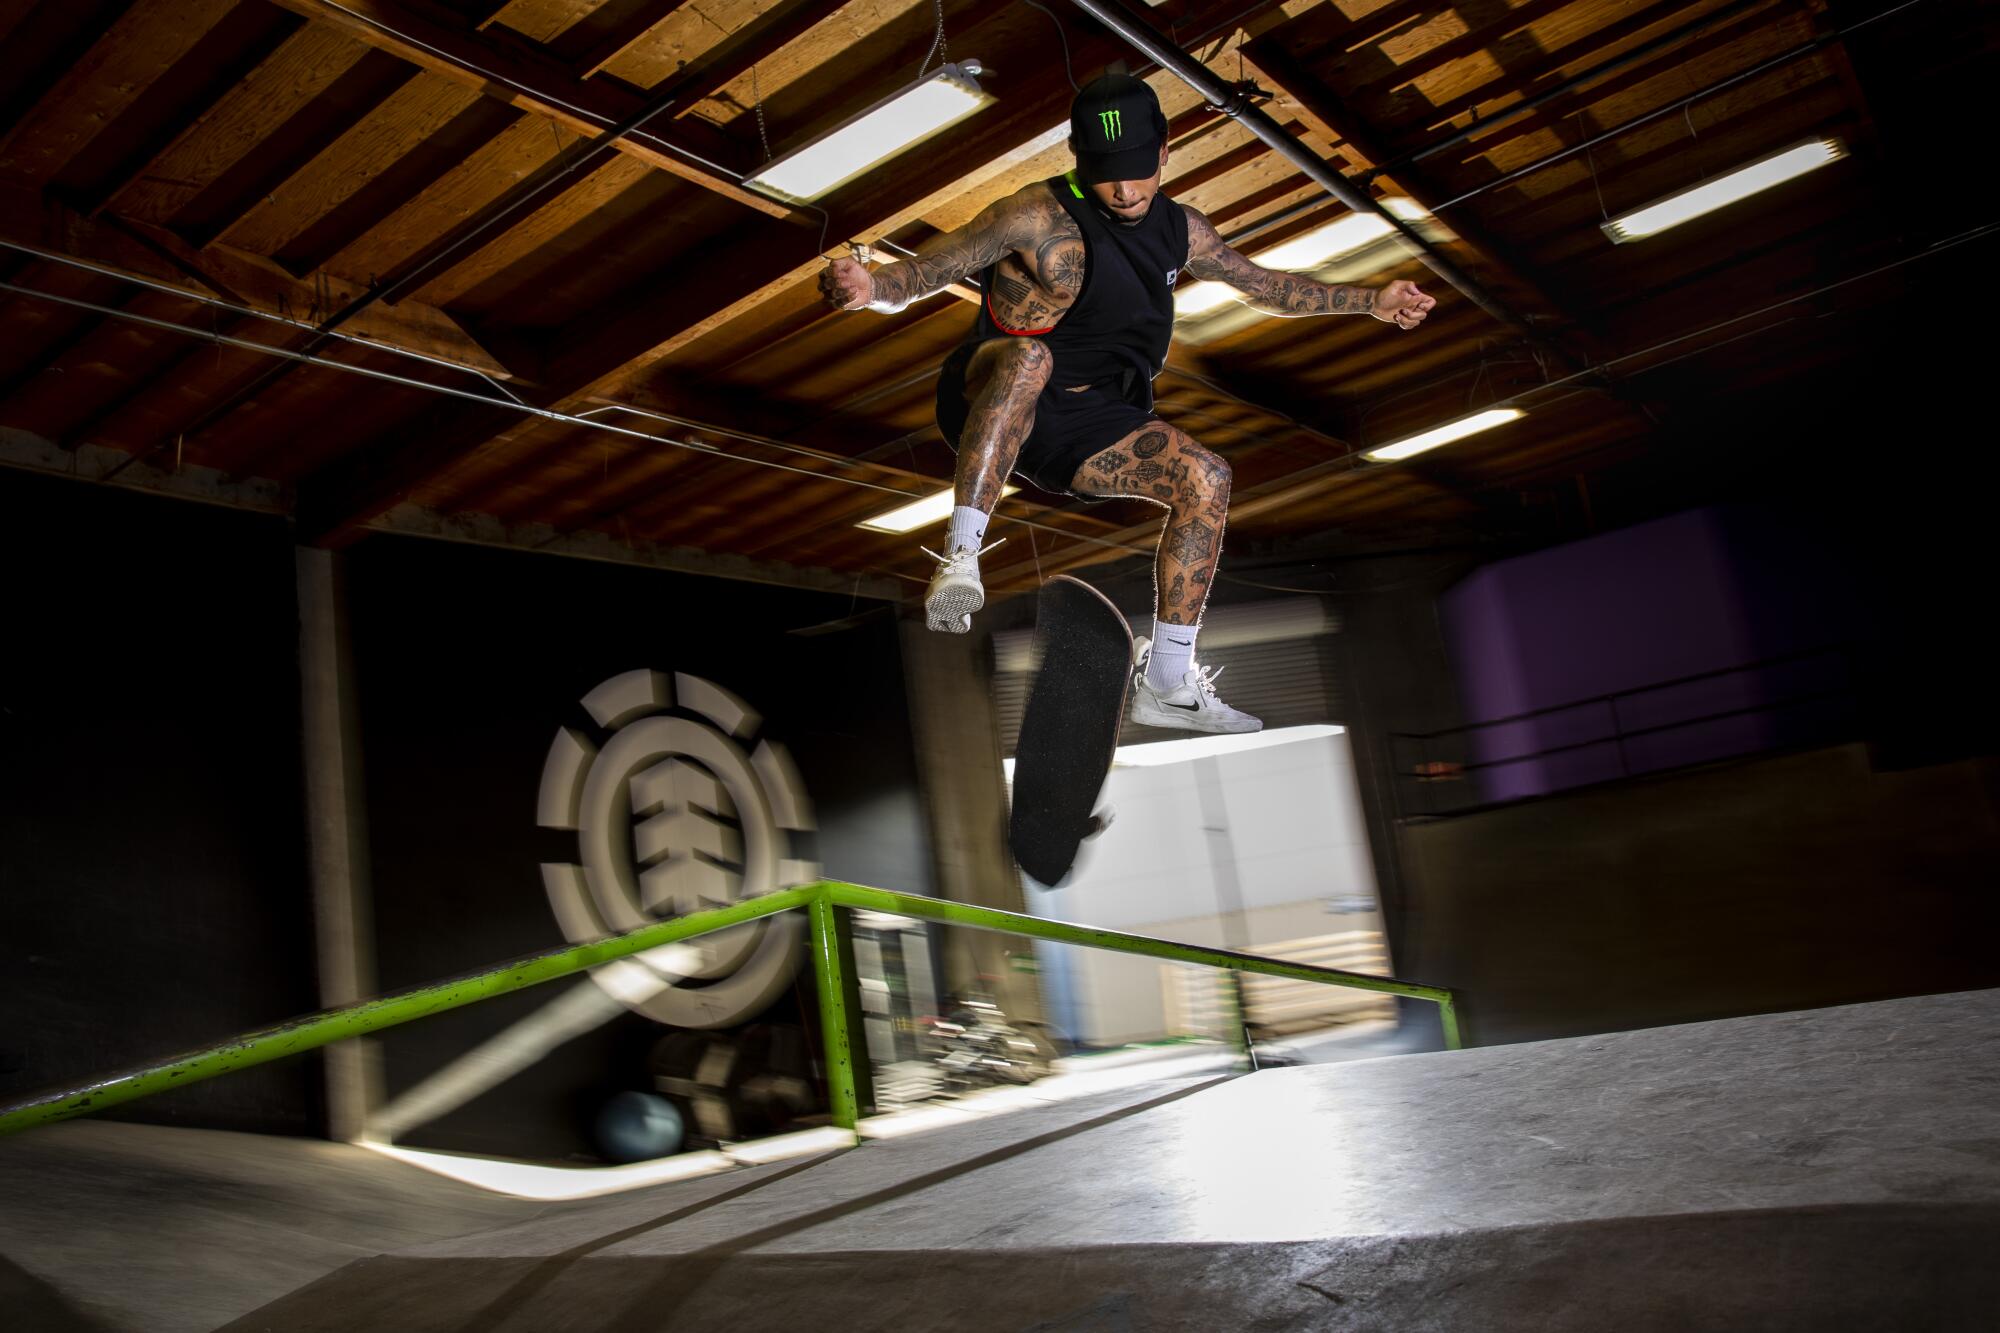  Nyjah Huston at his skate park in San Clemente, on Tuesday, May 4, 2021. 